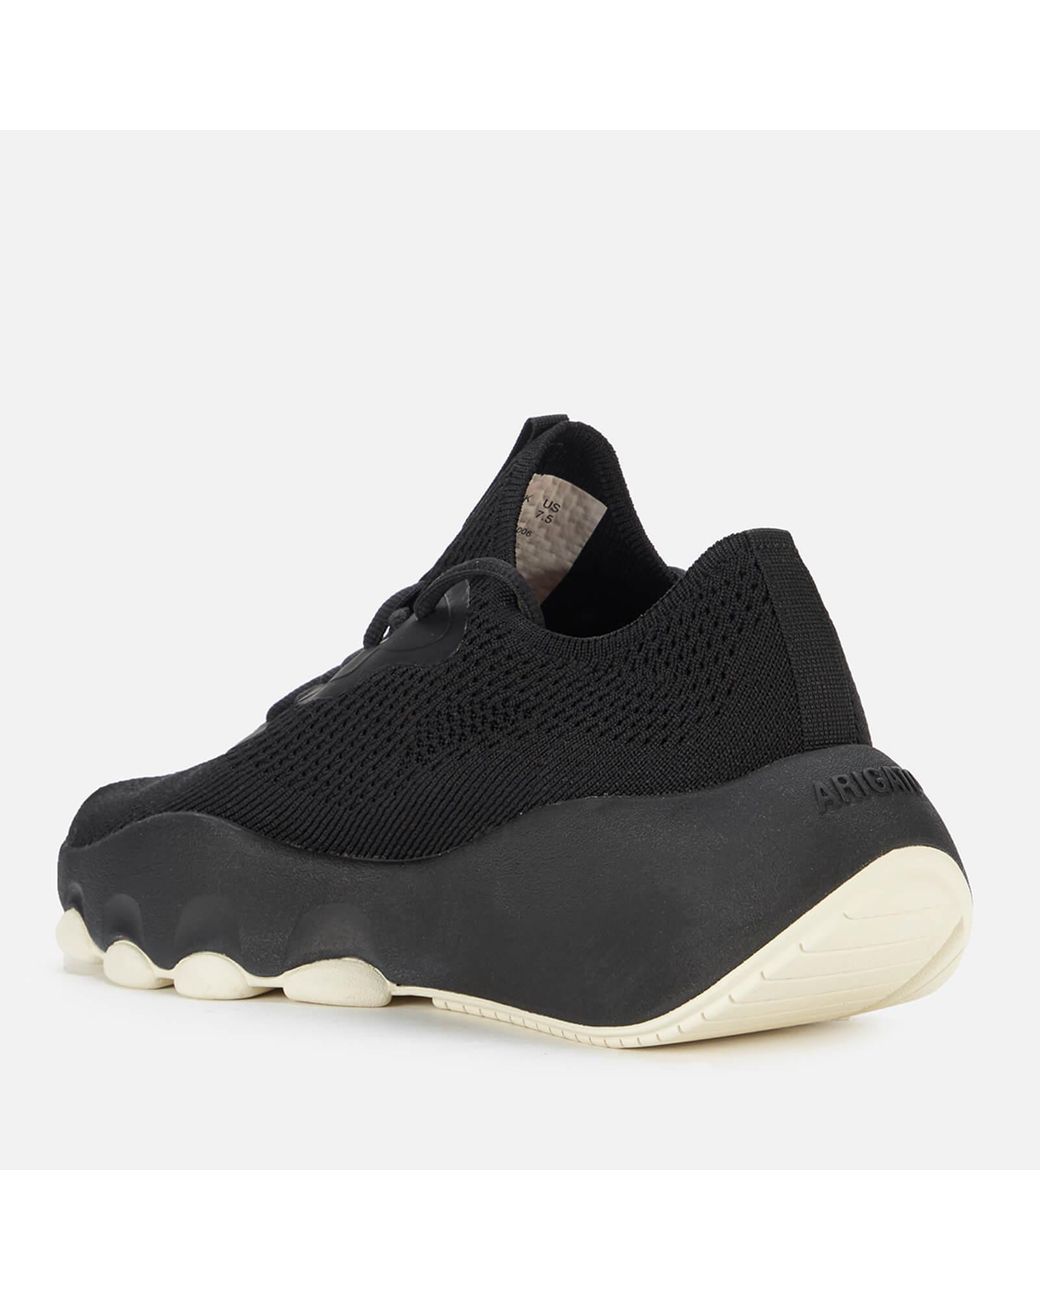 Axel Arigato Apex Knitted Running Style Trainers in Black | Lyst Canada